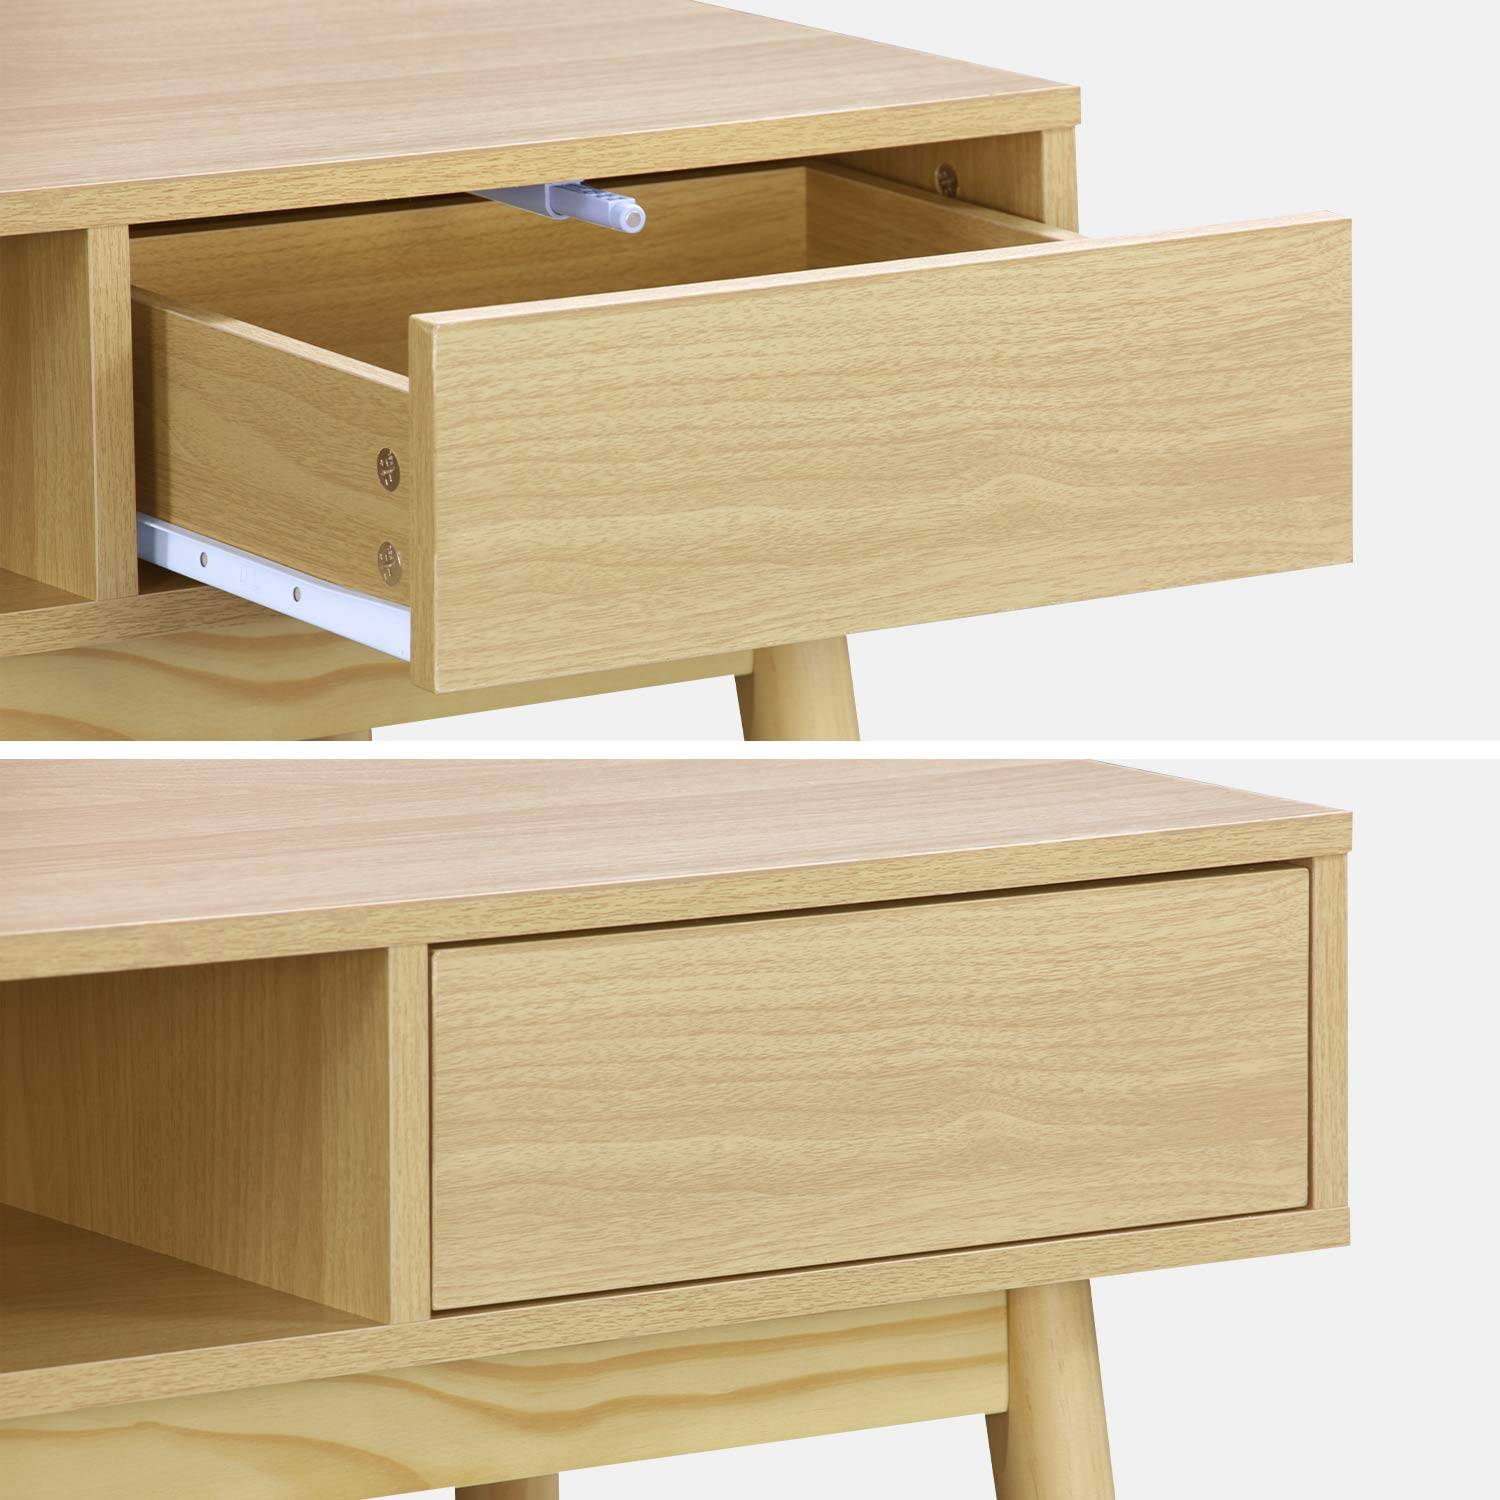 Wood-effect console table with two drawers and one storage nook, 120x48x75cm - Mika - Natural Wood colour Photo5